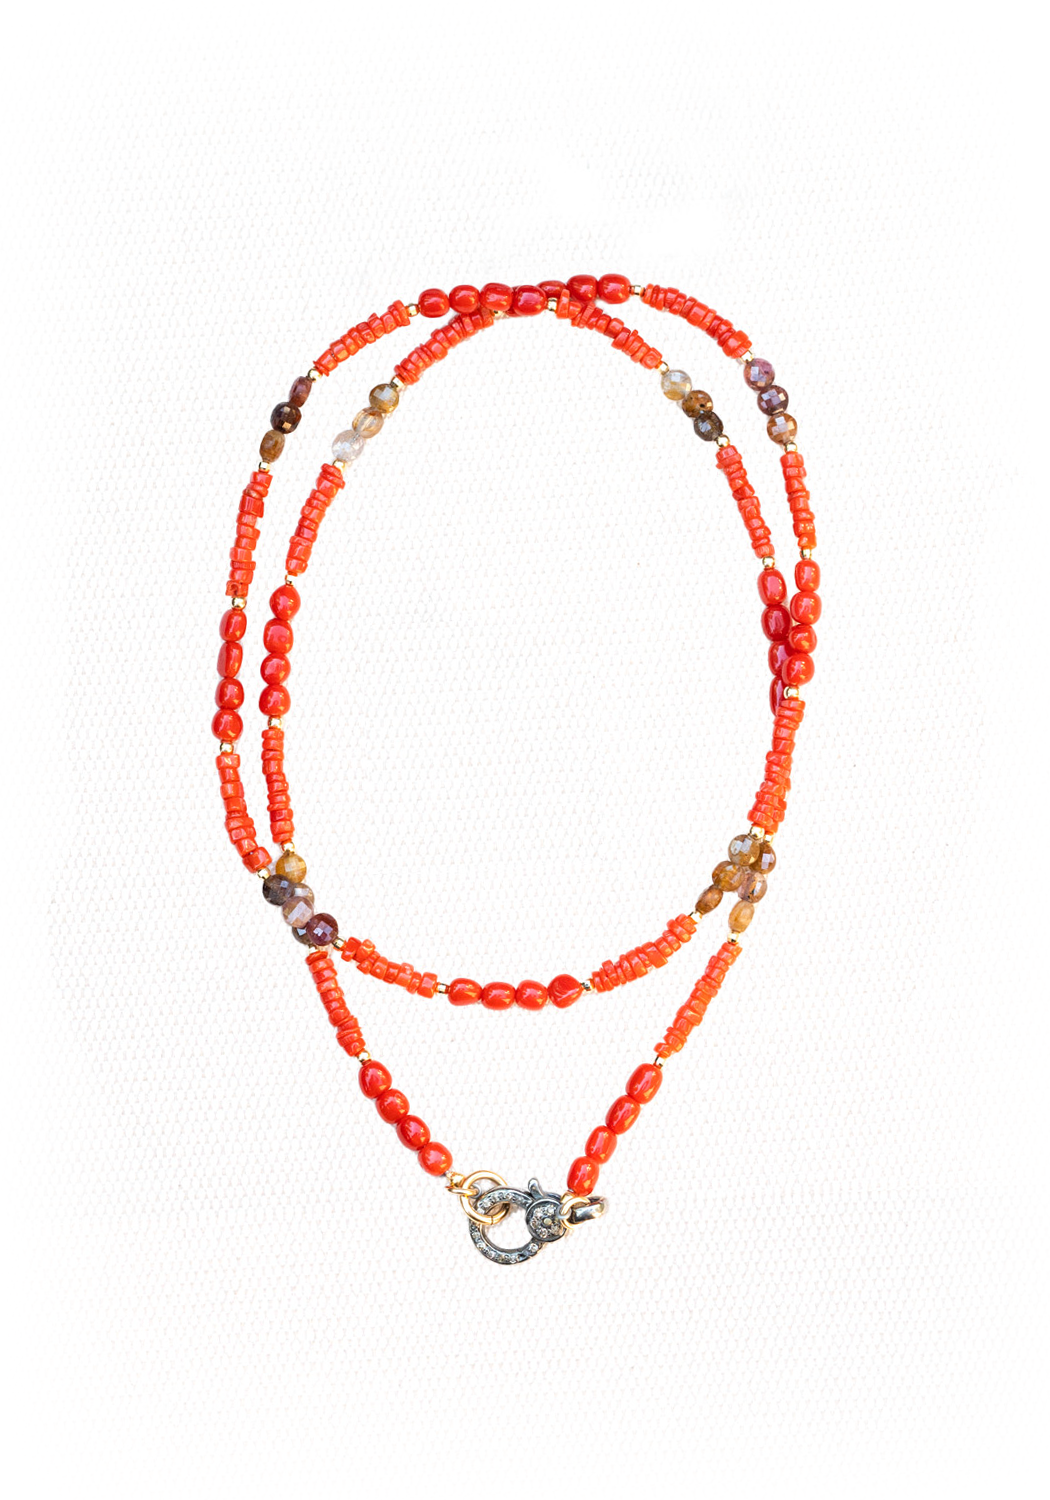 Catherine Michiels Coral Heishi Red Tourmaline Bead Necklace | OsterJewelers.com